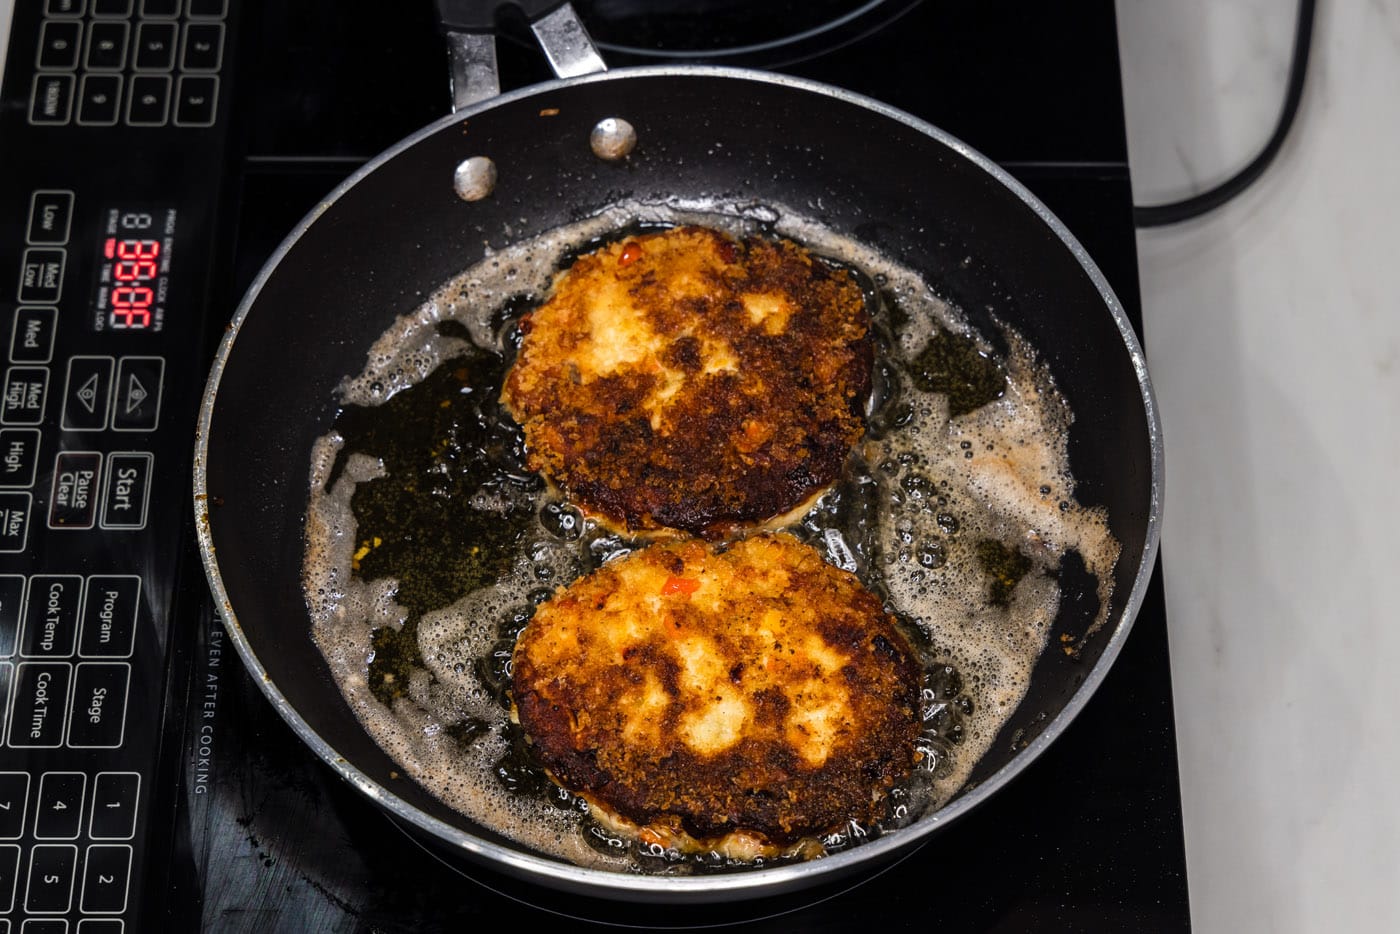 fried fish burgers in a skillet